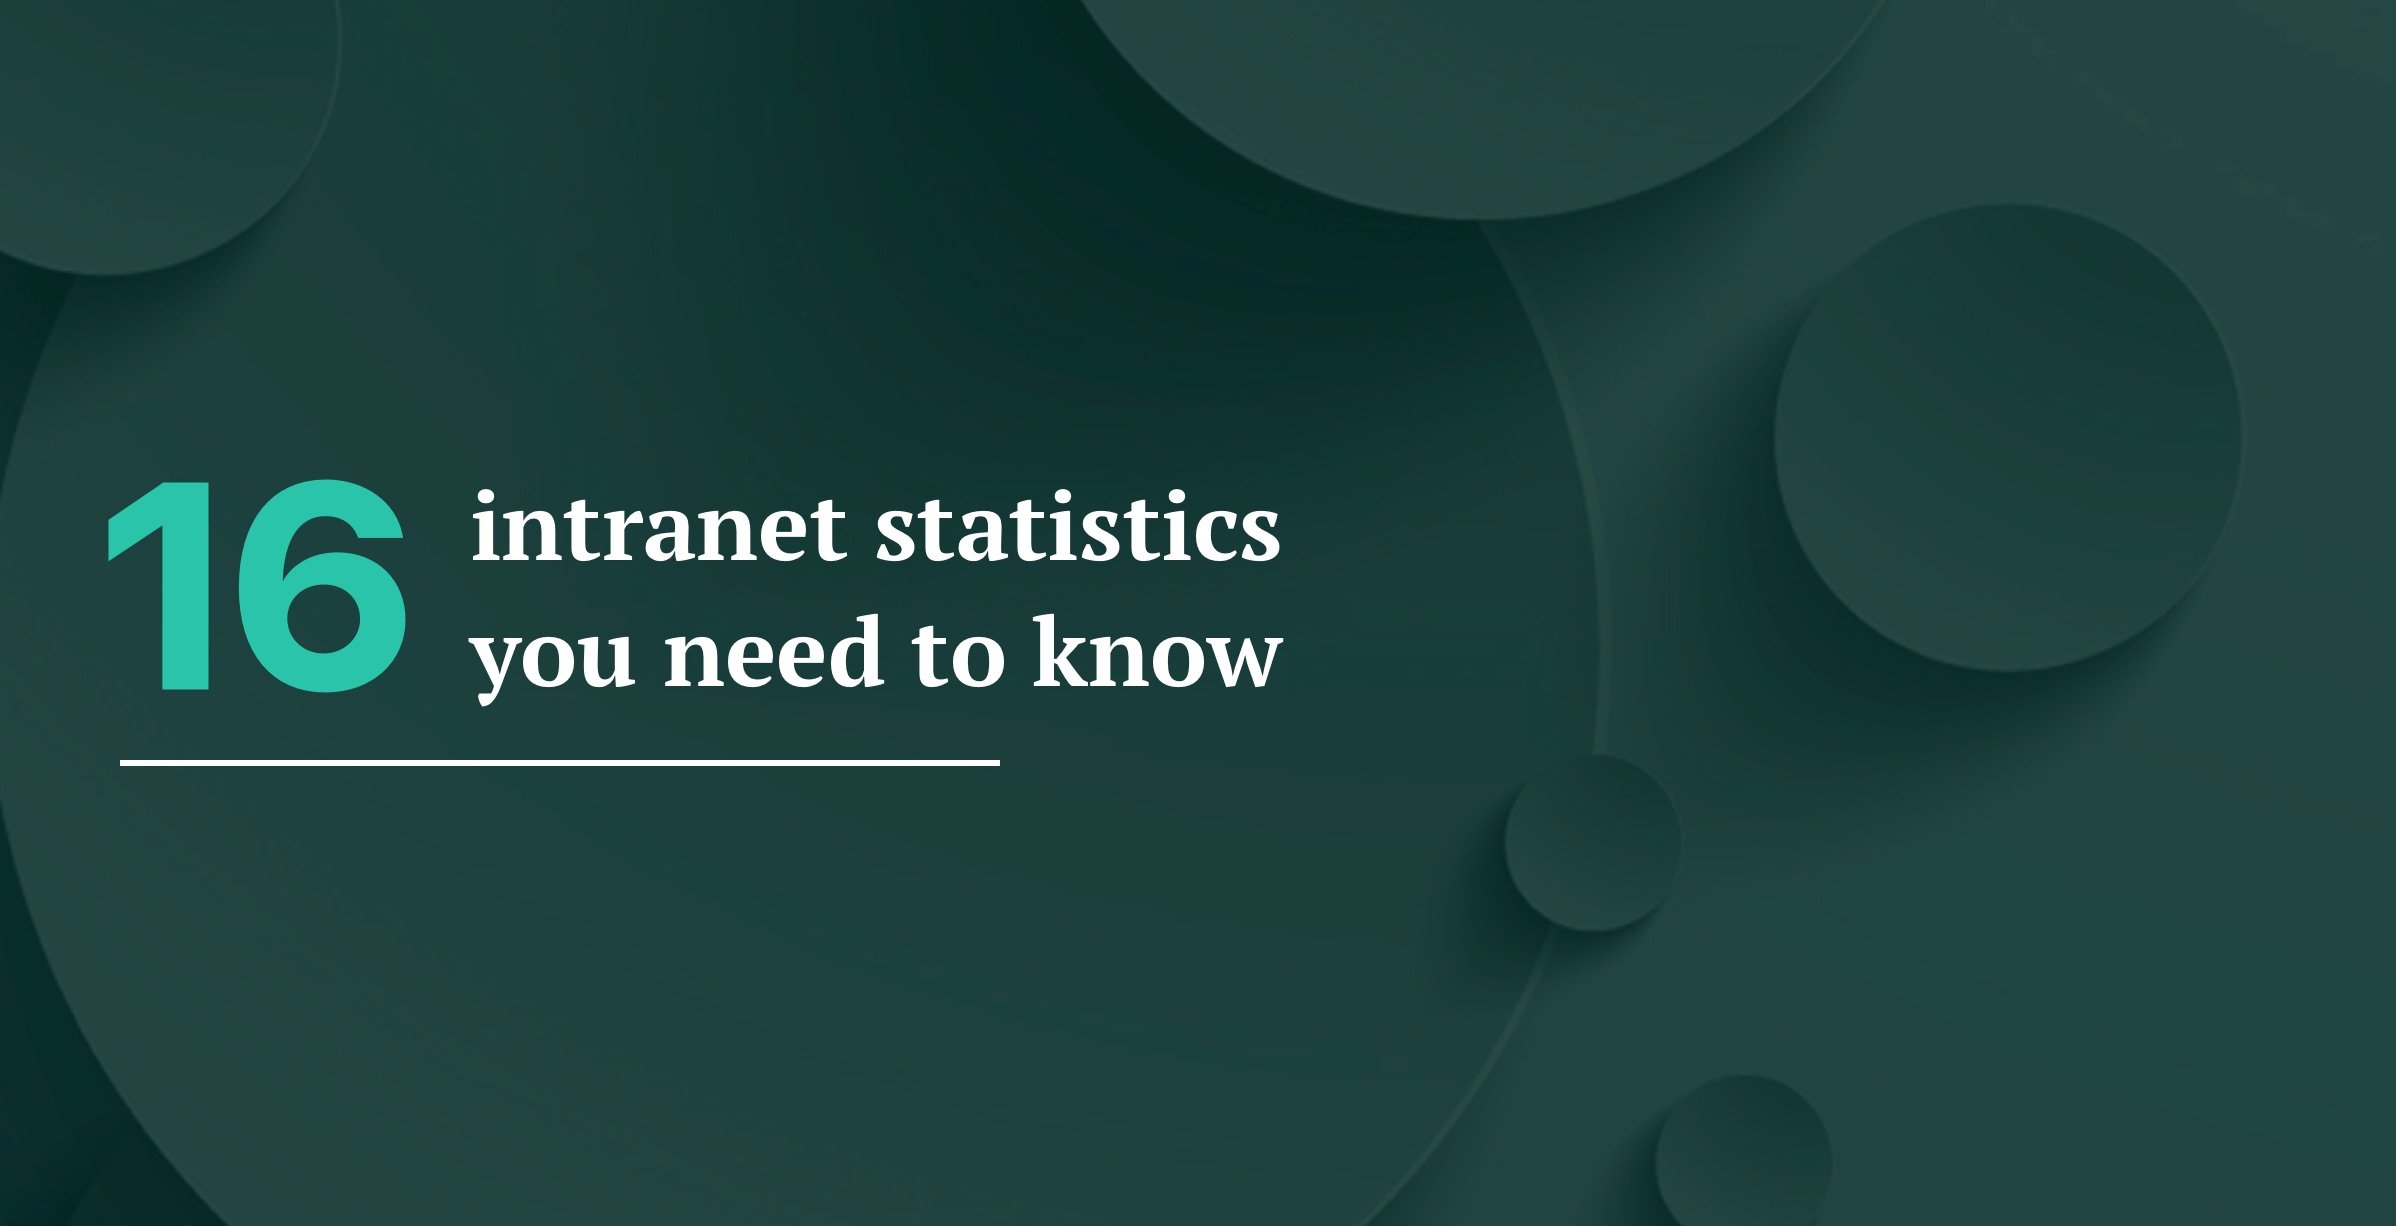 16 intranet statistics you need to know in 2023